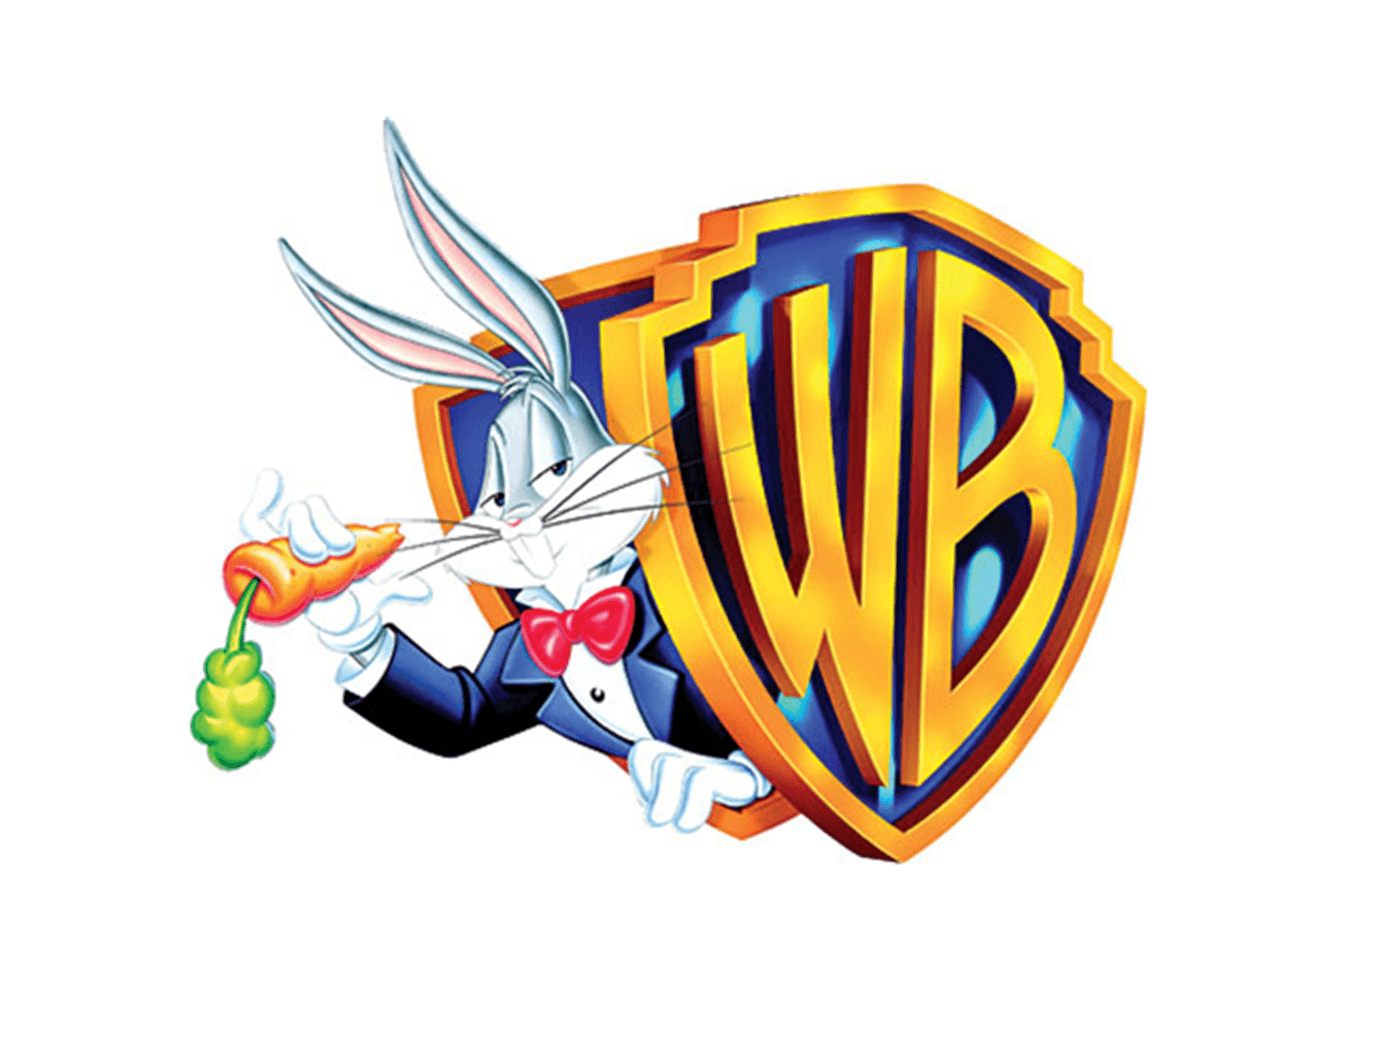 WB Shield Logo - Image - Bugs Bunny in a WB Shield.png | Warner Bros Animation Wiki ...